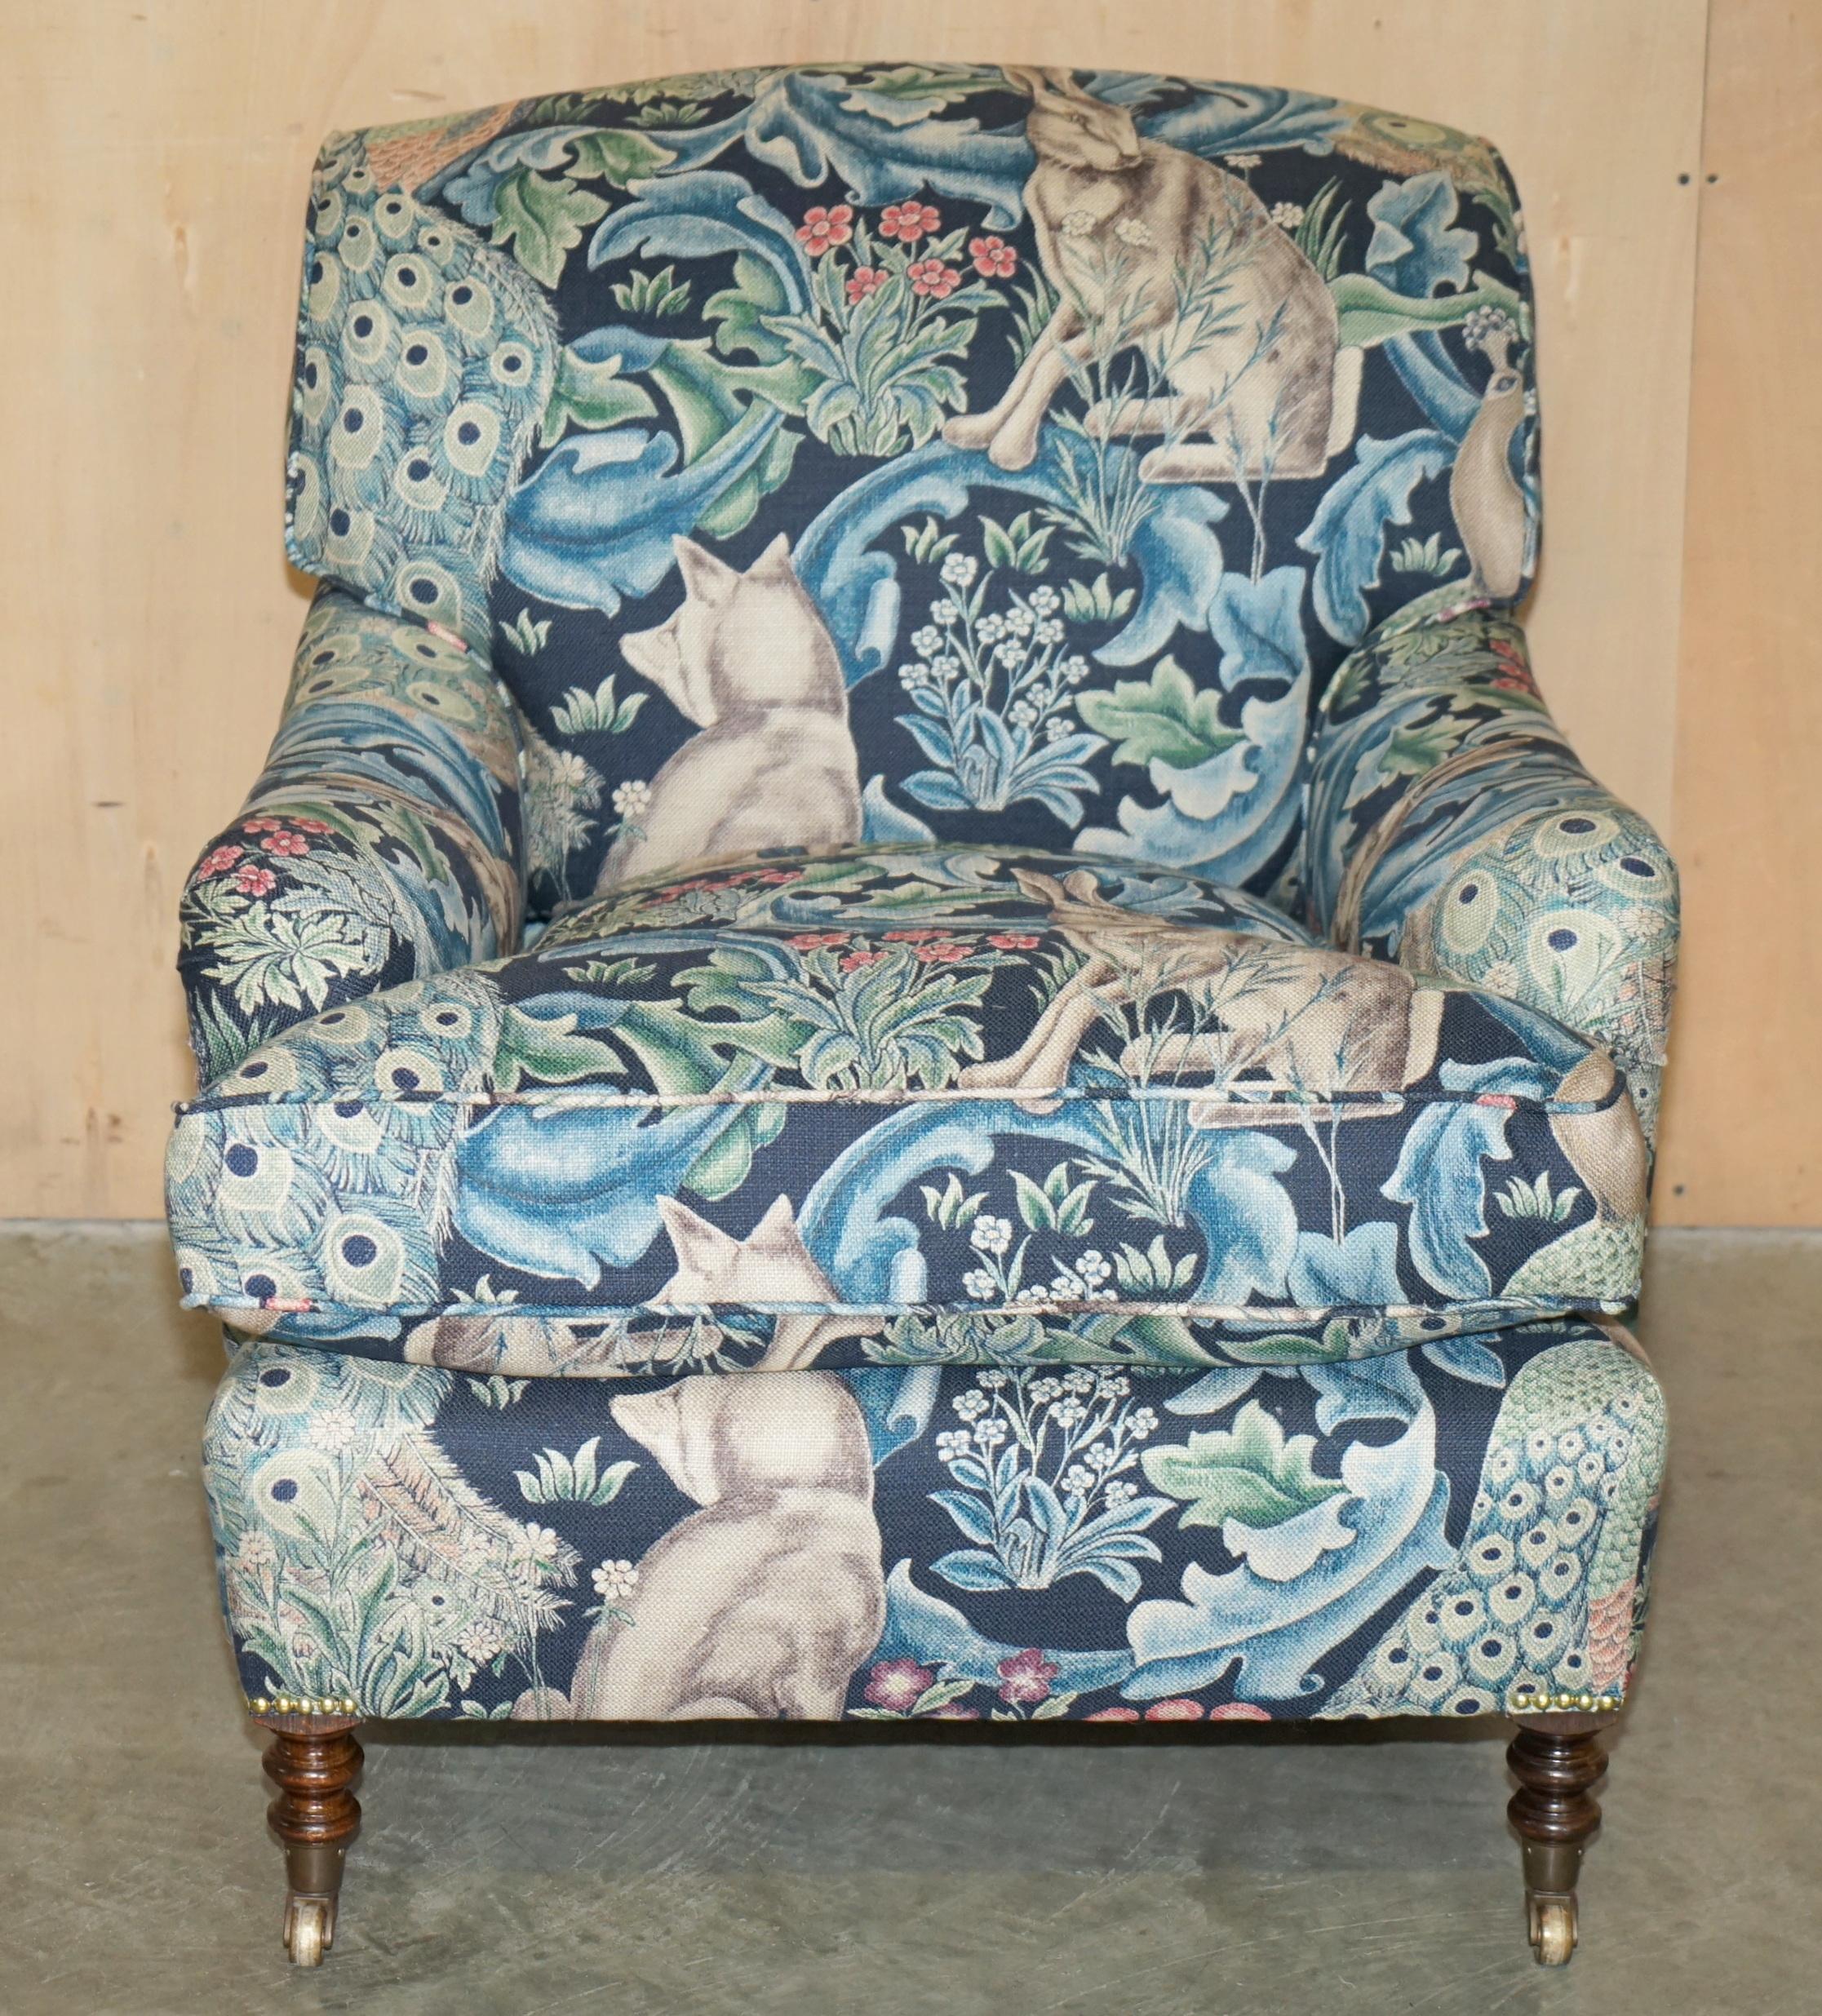  GEORGE SMiTH HOWARD & SON'S WILLIAM MORRIS SOFA ARMCHAIR SUITE For Sale 5